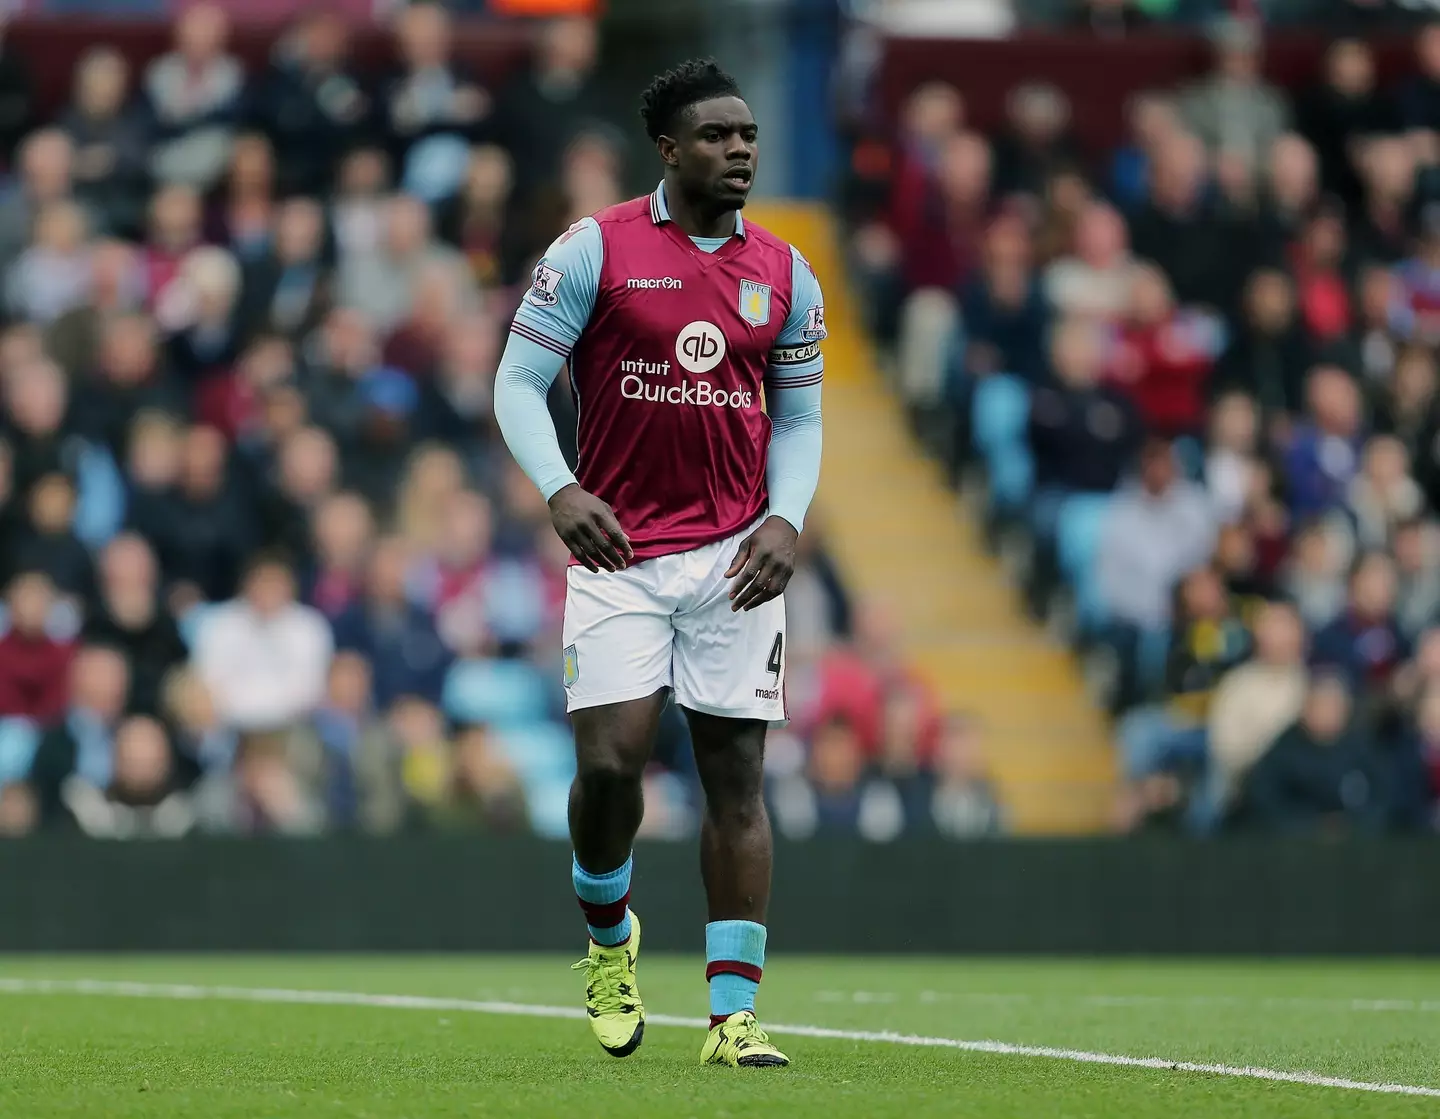 Richards joined Villa in 2015 after a decade at Manchester City. (Image